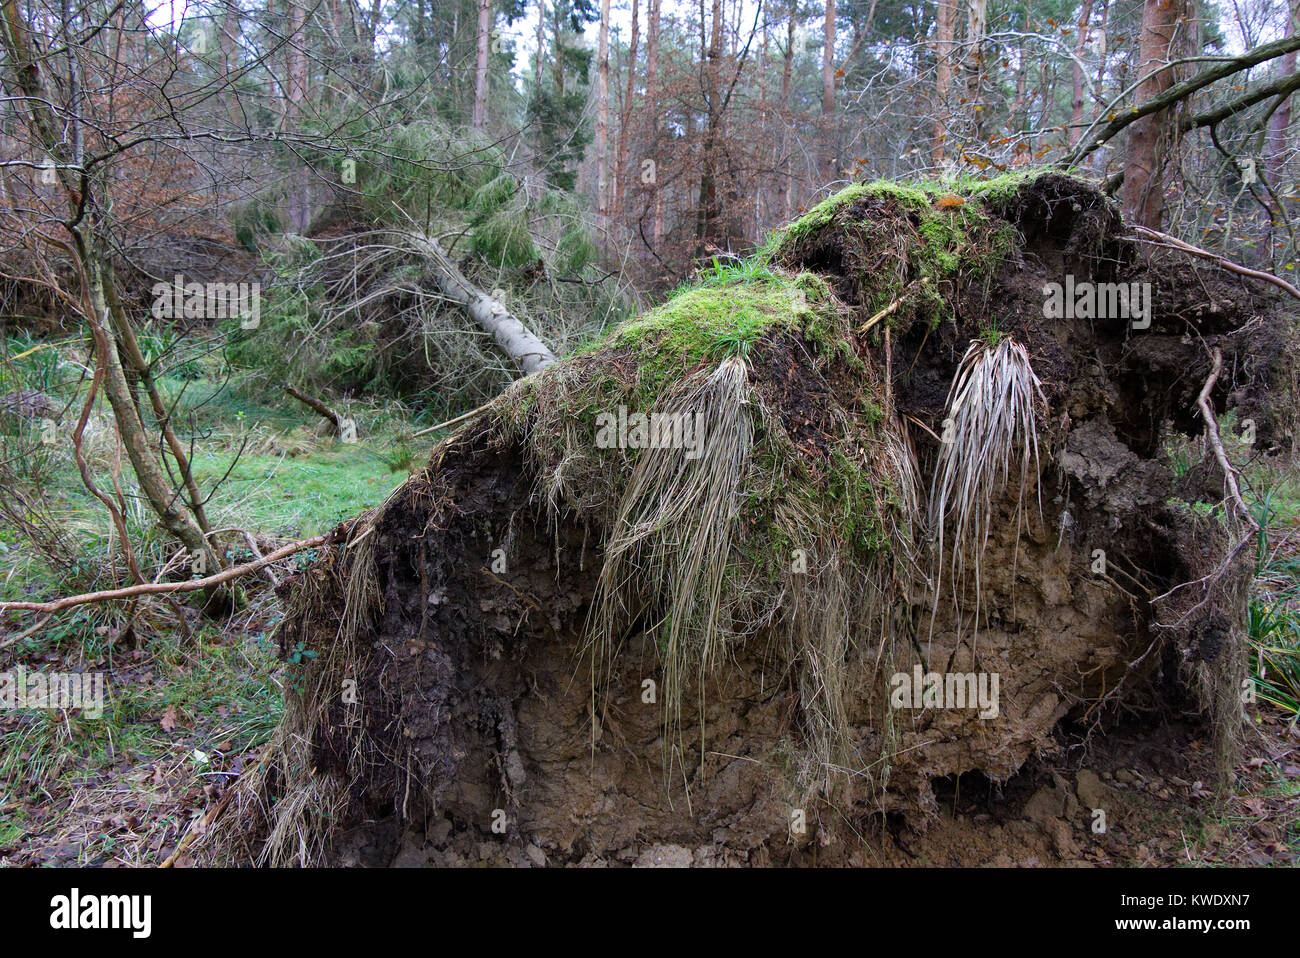 Fallen tree in woodland with large clod of earth ripped up by the roots, Broxbourne Woods, UK, Winter Stock Photo